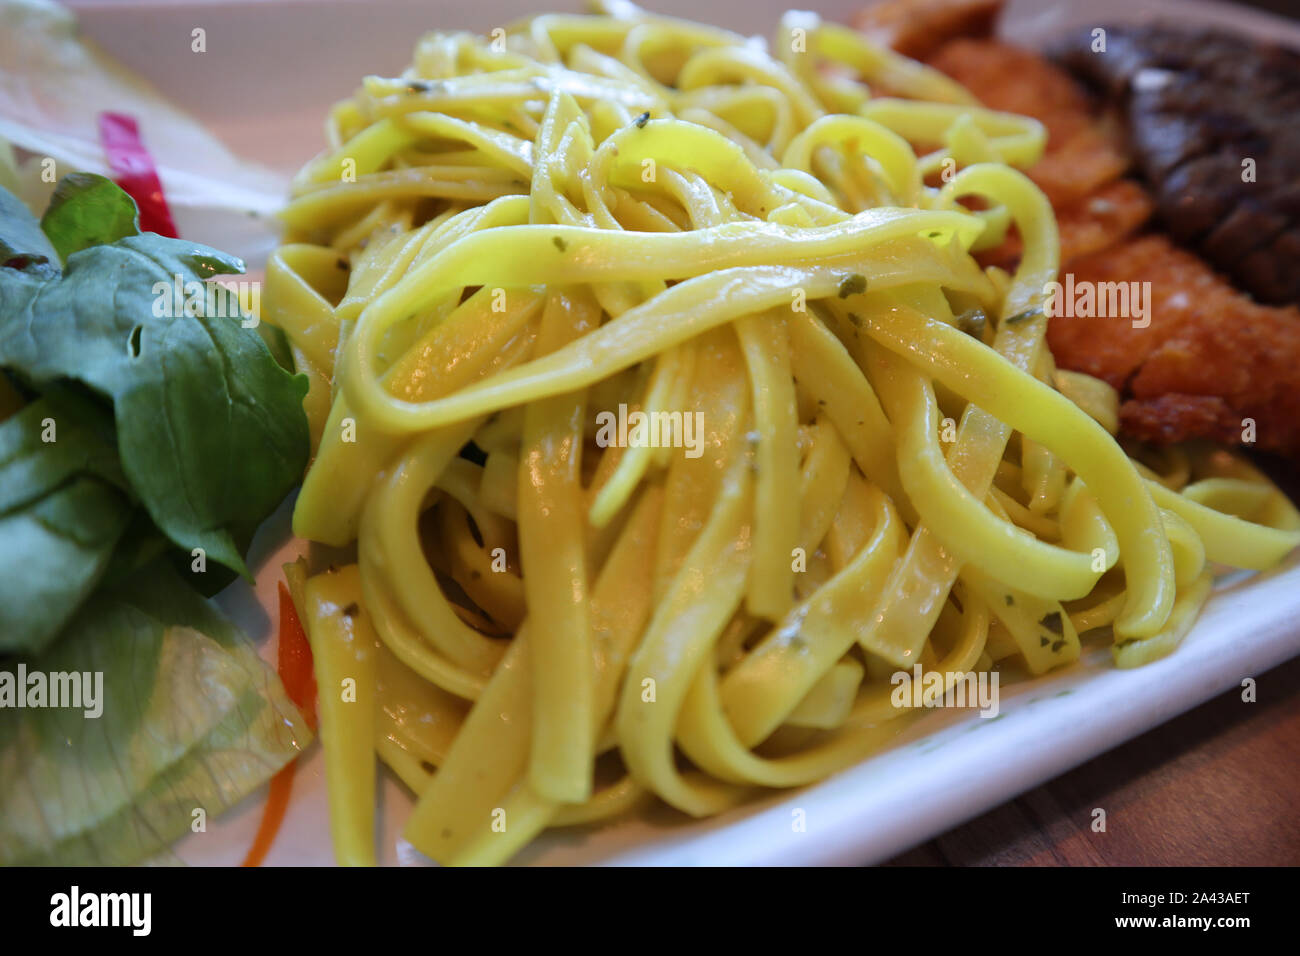 Tasty Food in Turkish Restaurant. Asian Cooked Healthy Pasta. Stock Photo